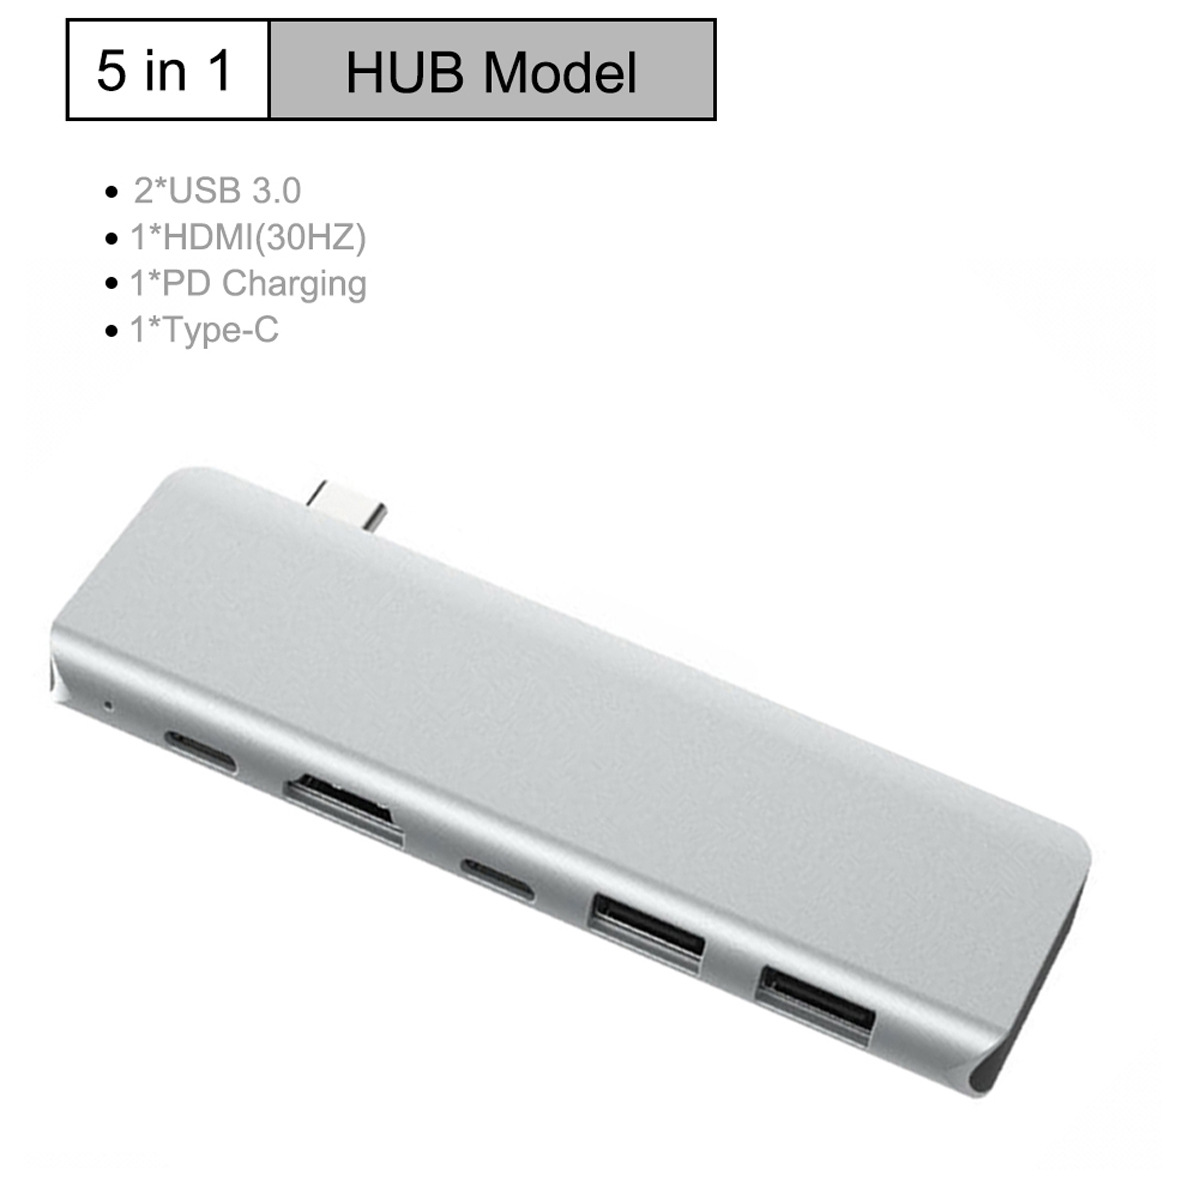 5-in-1 USB HUB Type-C to HDMI 2USB 3.0 PD Charging Type C Power Adapter Multi Ports Splitter Dock